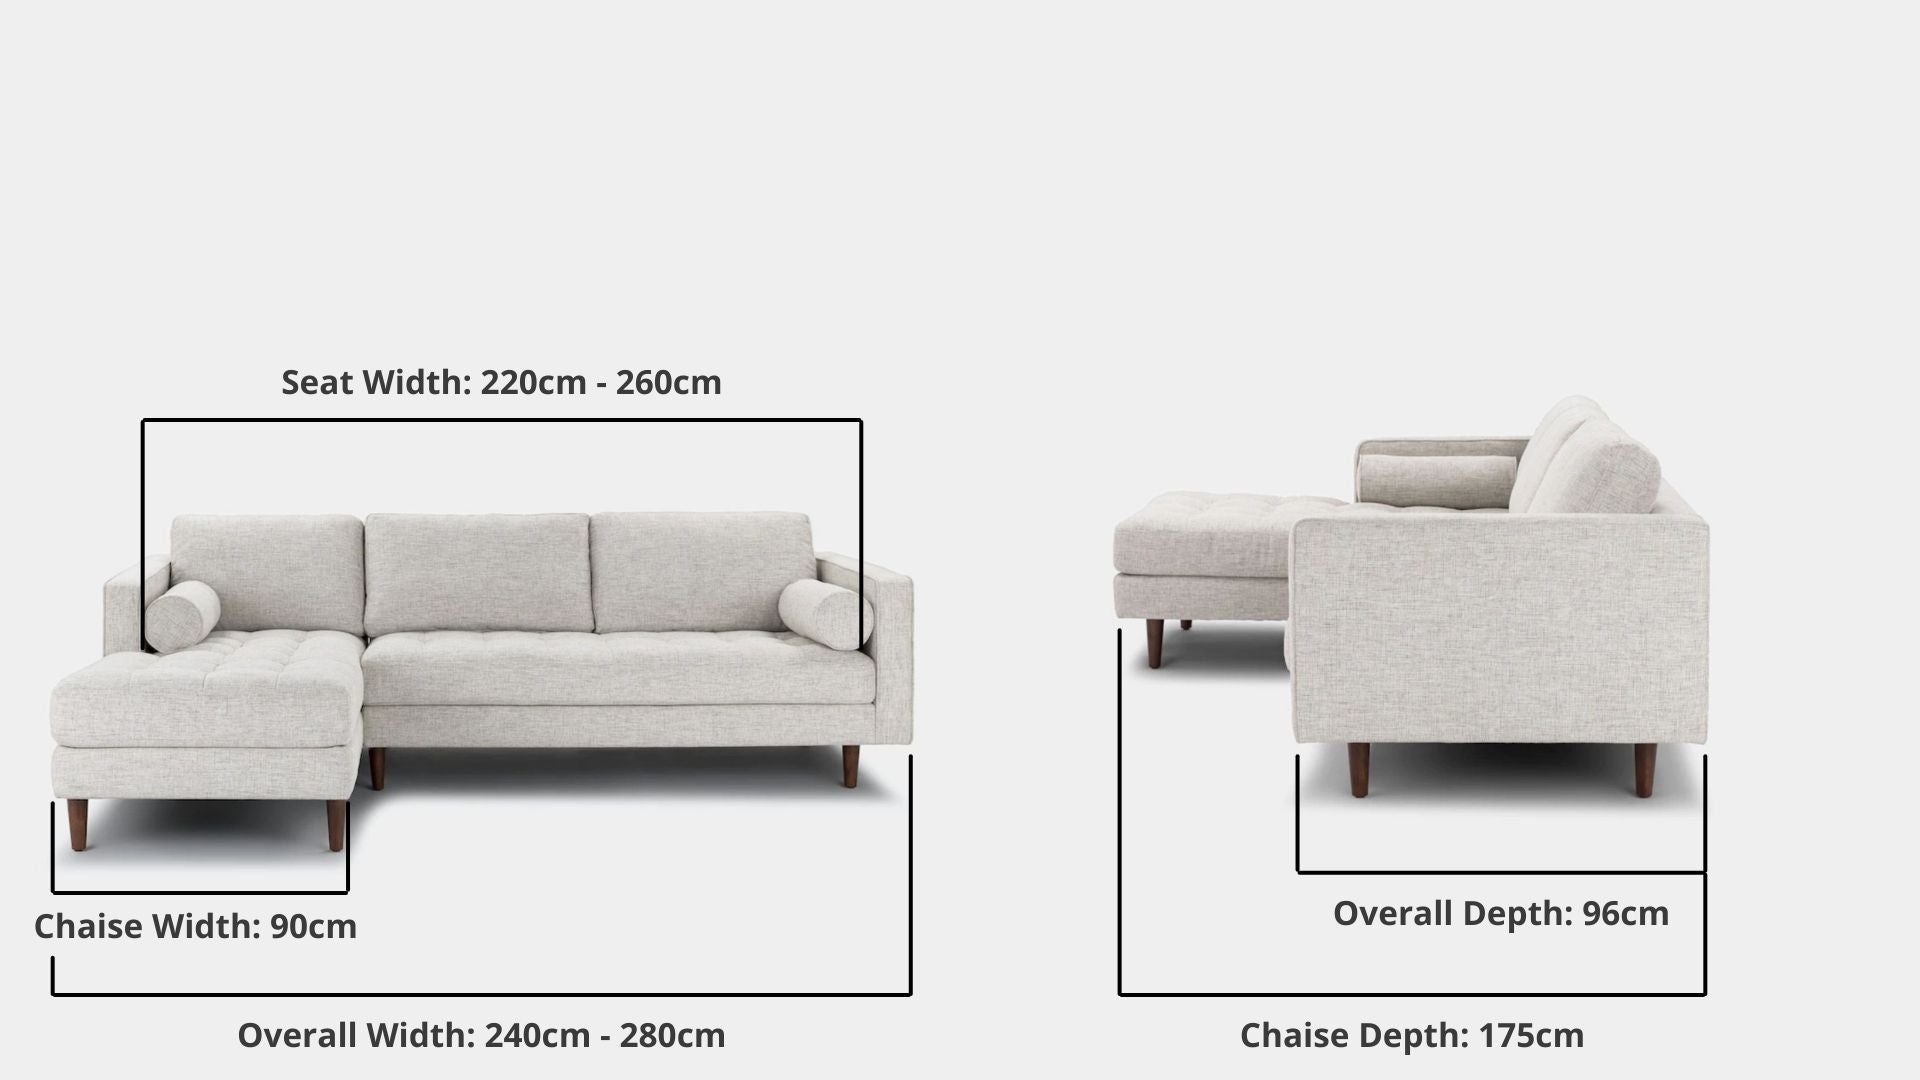 Details the key dimensions in terms of overall width, overall depth and seat width for Castle Fabric Sectional Sofa